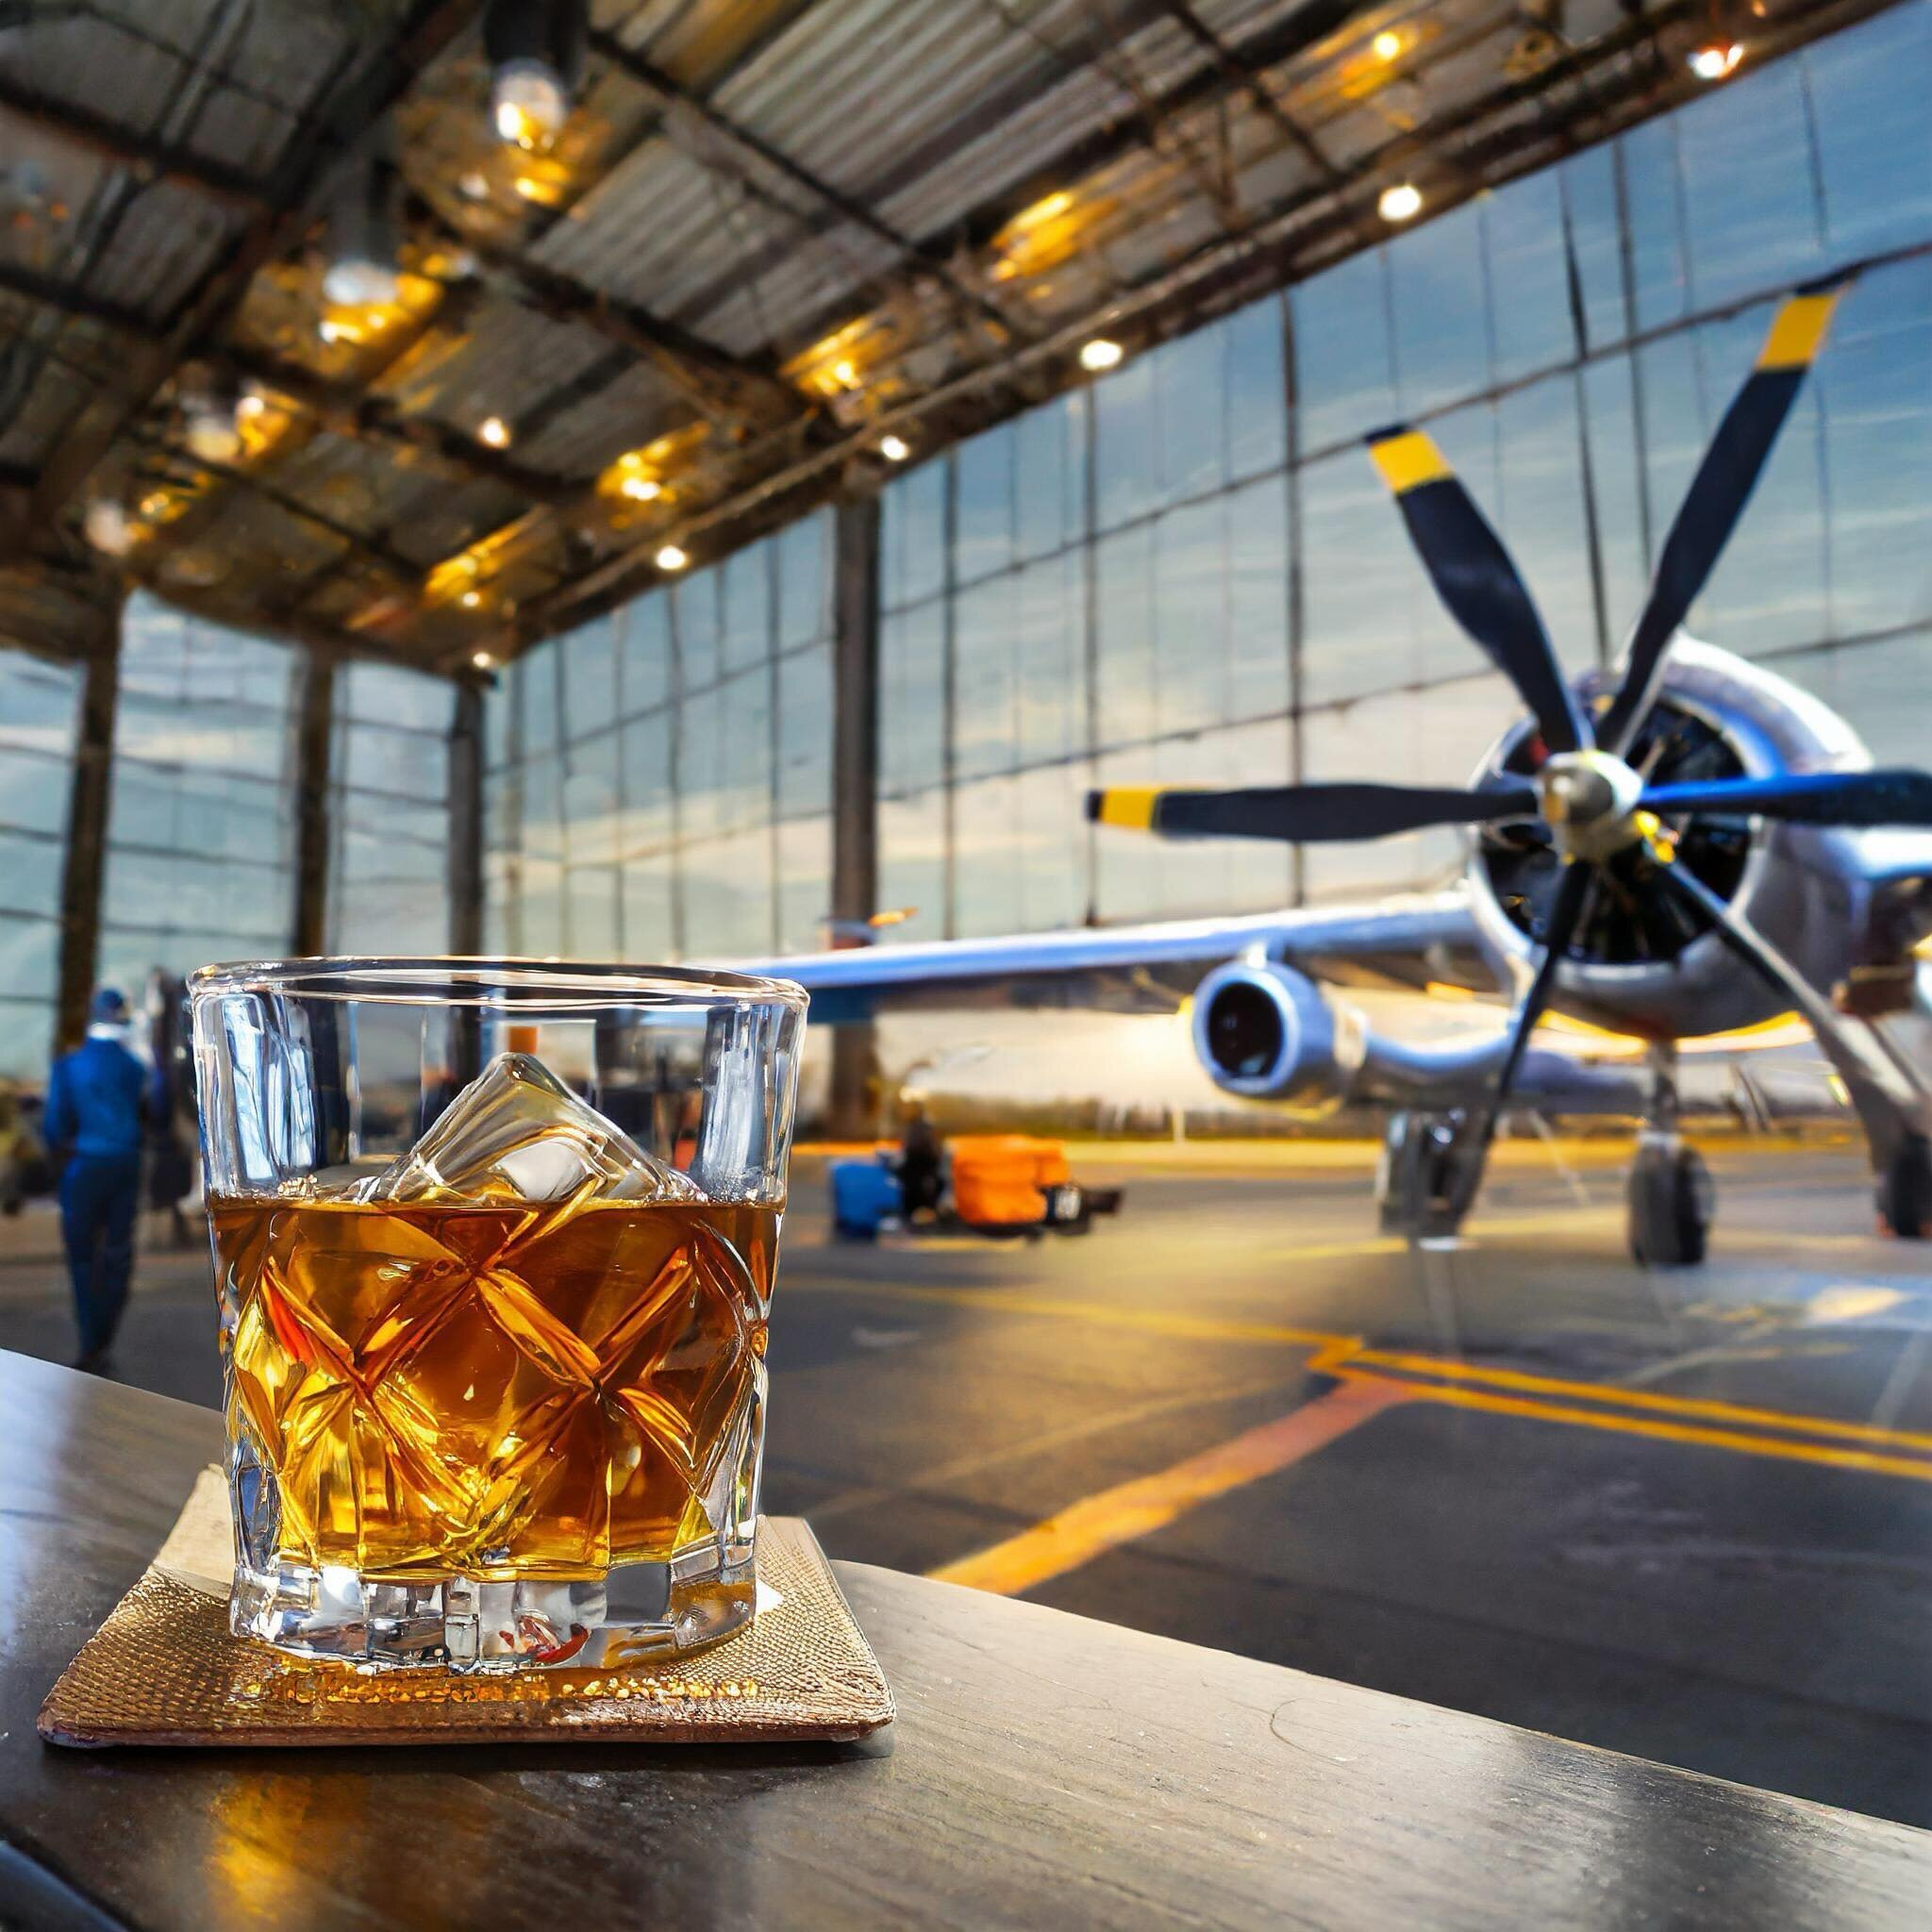 The fascination of flight can&rsquo;t be expressed with words. 
#whiskeywednesday #whiskeywonderland #whiskey  #wenesday #loveflying #traveling #destination